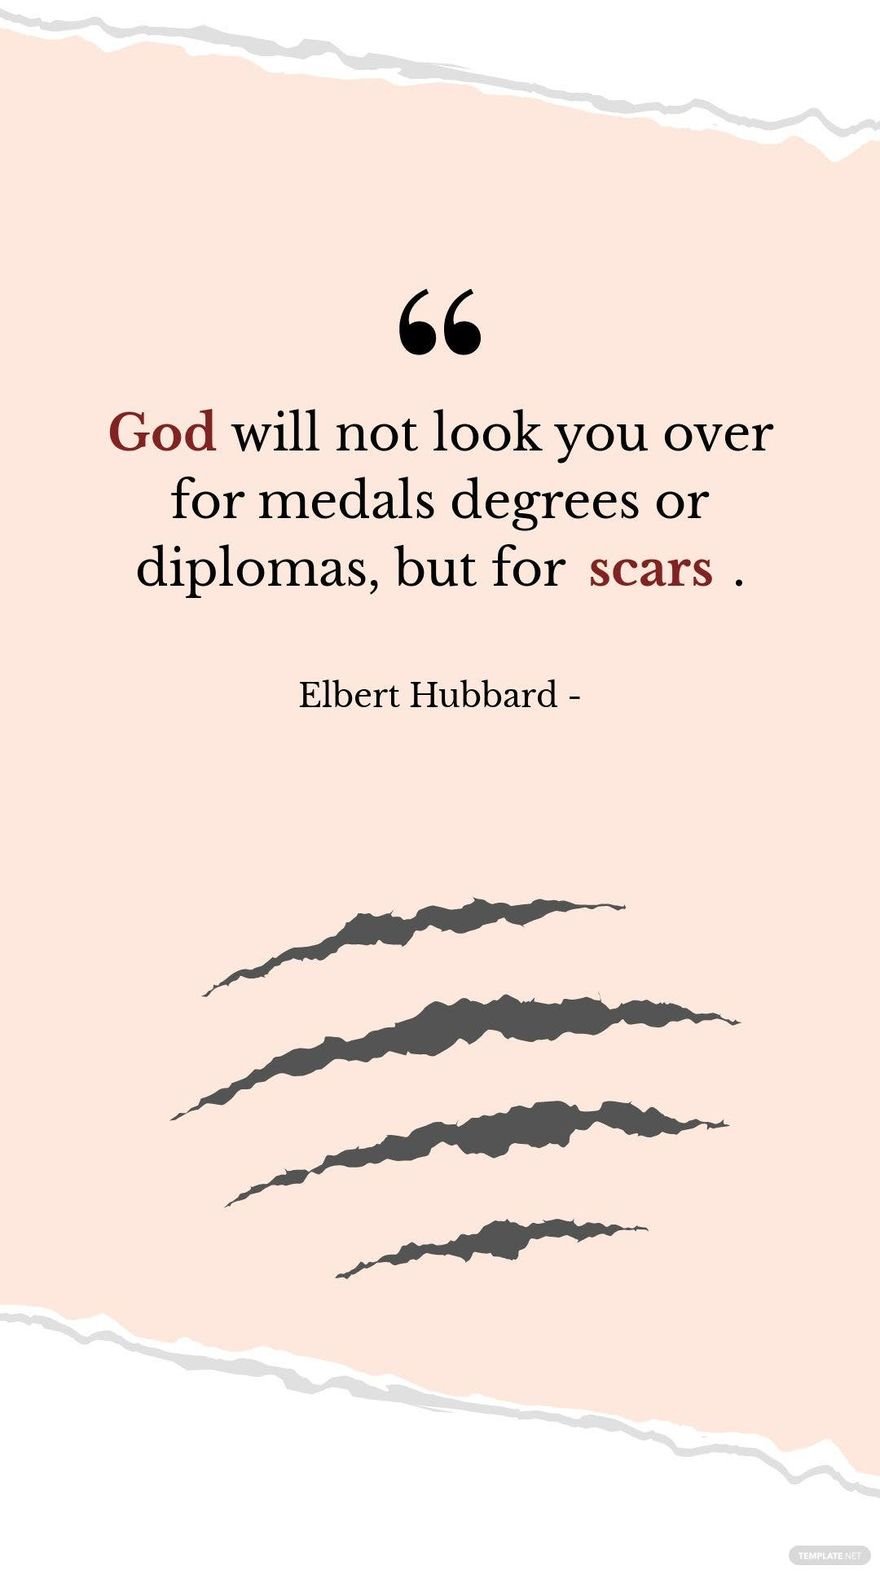 Elbert Hubbard - God will not look you over for medals degrees or diplomas, but for scars.